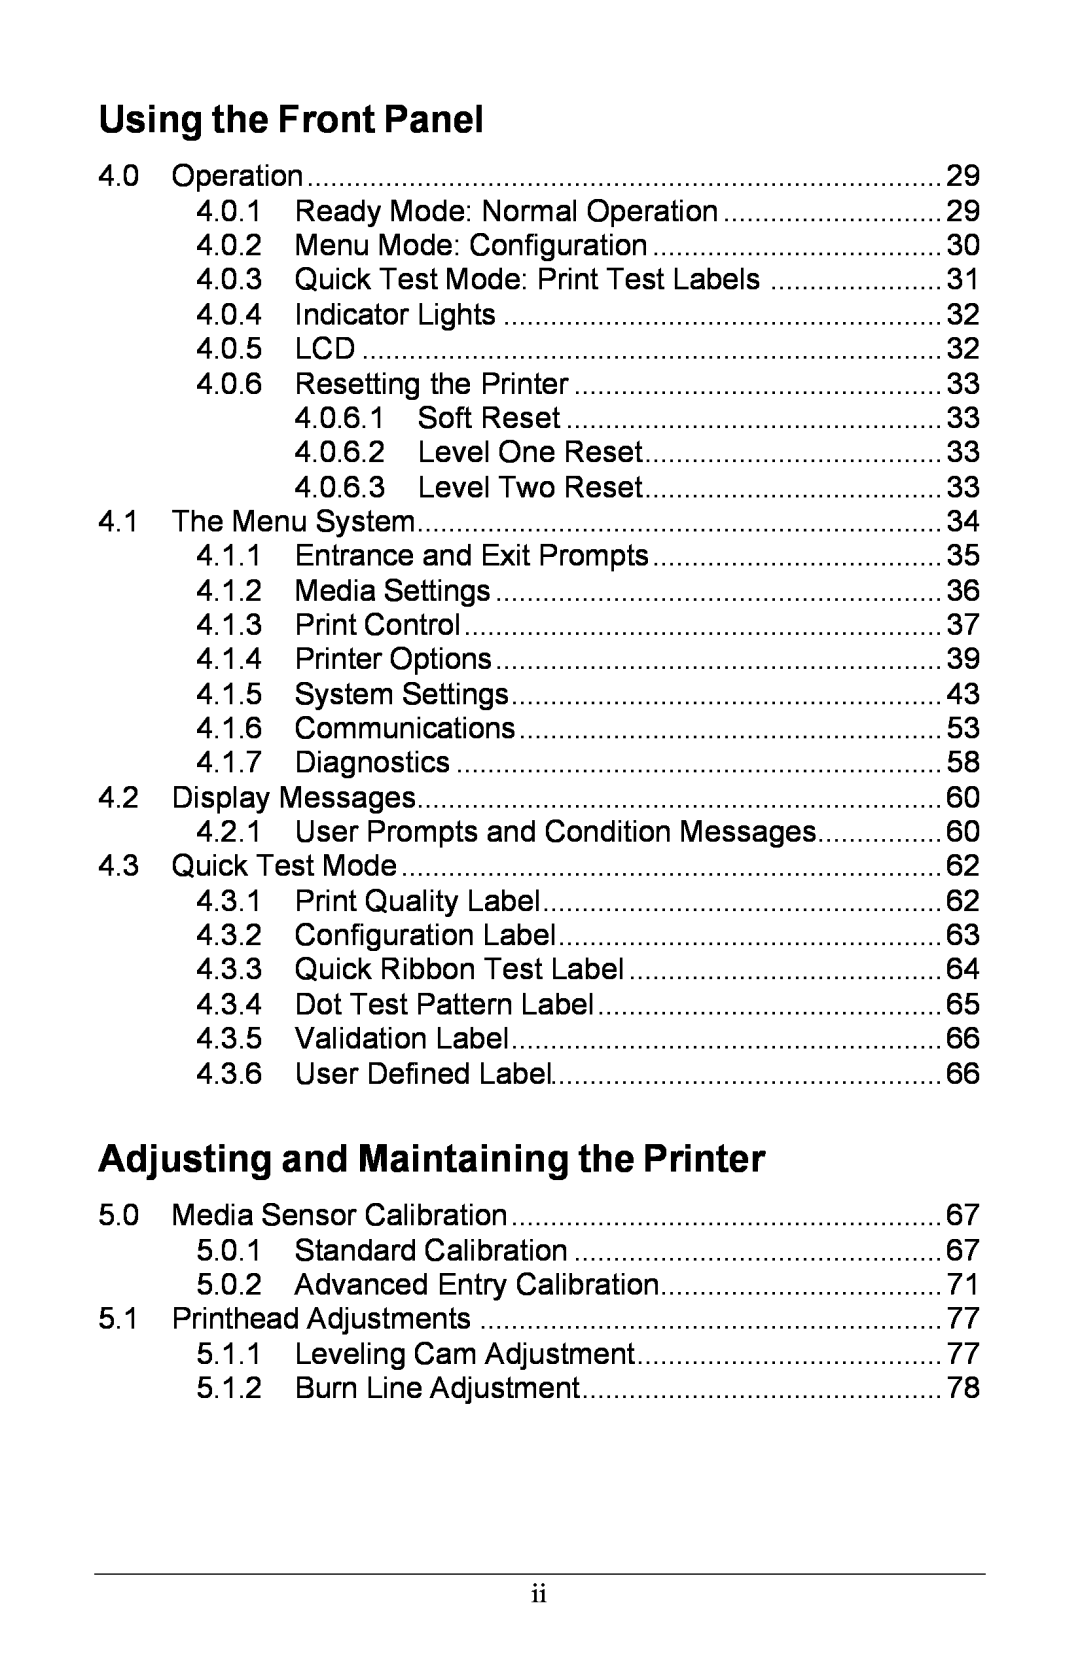 Xerox I Class manual Using the Front Panel, Adjusting and Maintaining the Printer 